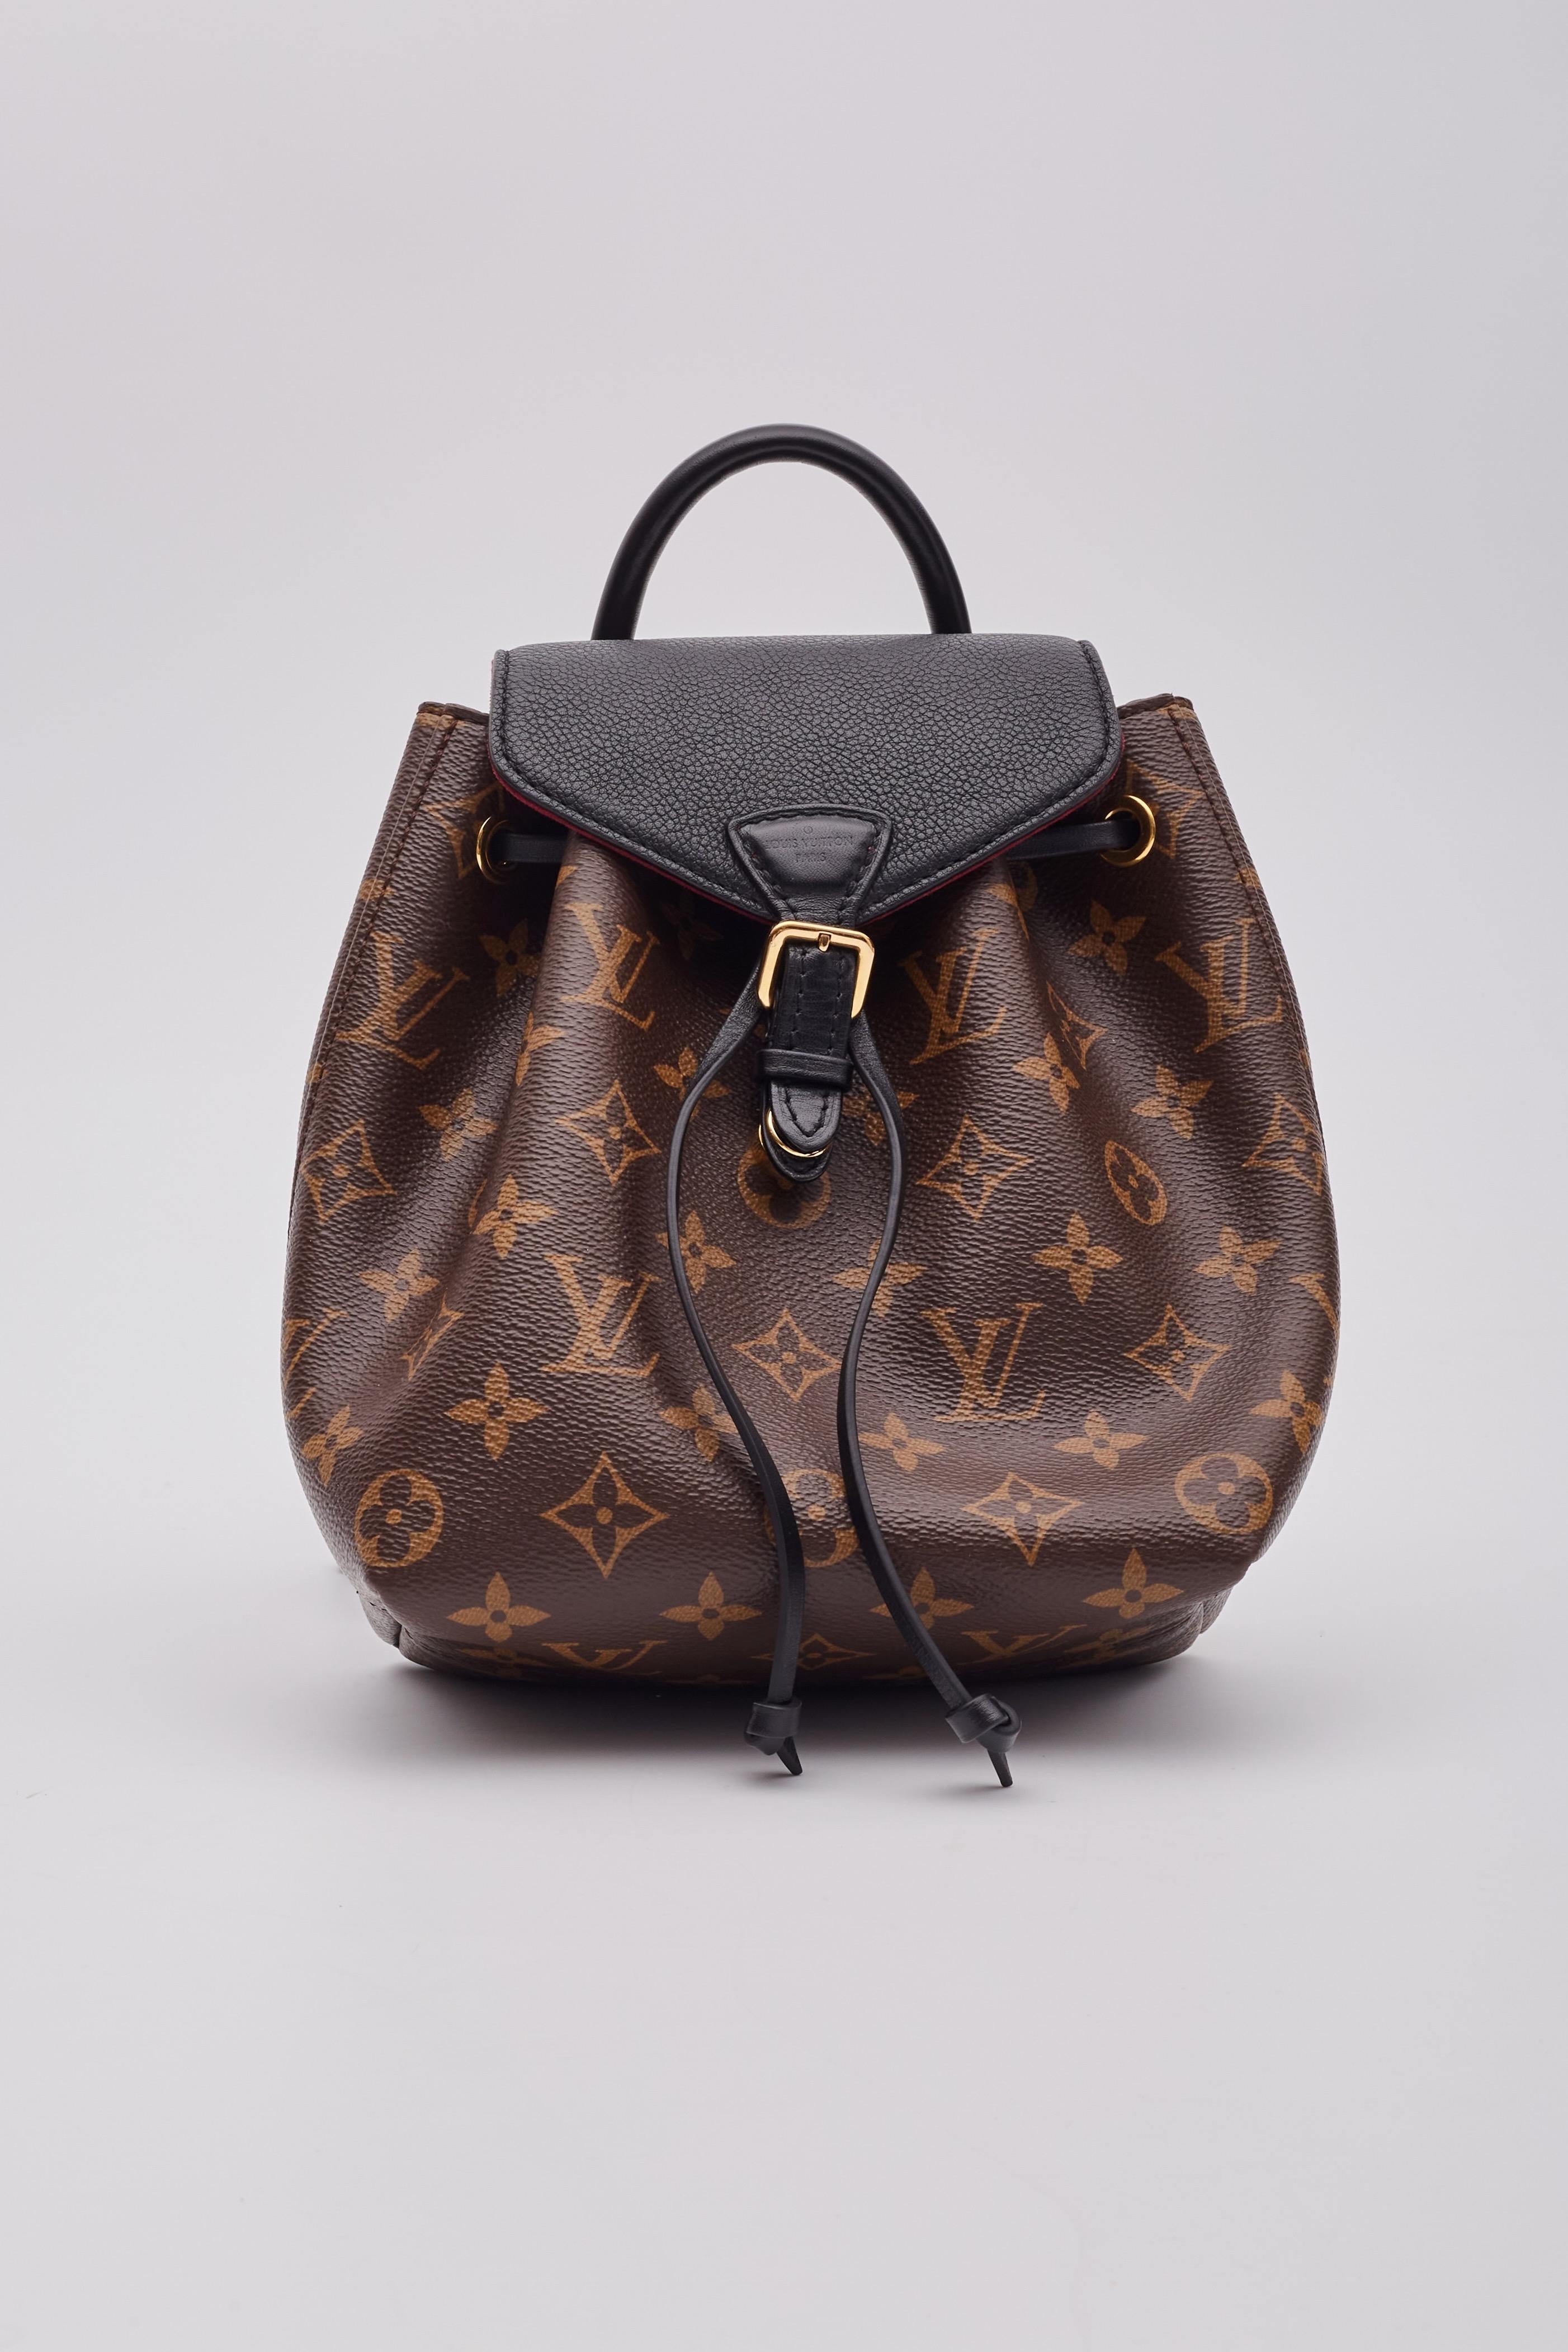 Louis Vuitton Monogram Rucksack Montsouris NM BB Backpack In Excellent Condition For Sale In Montreal, Quebec